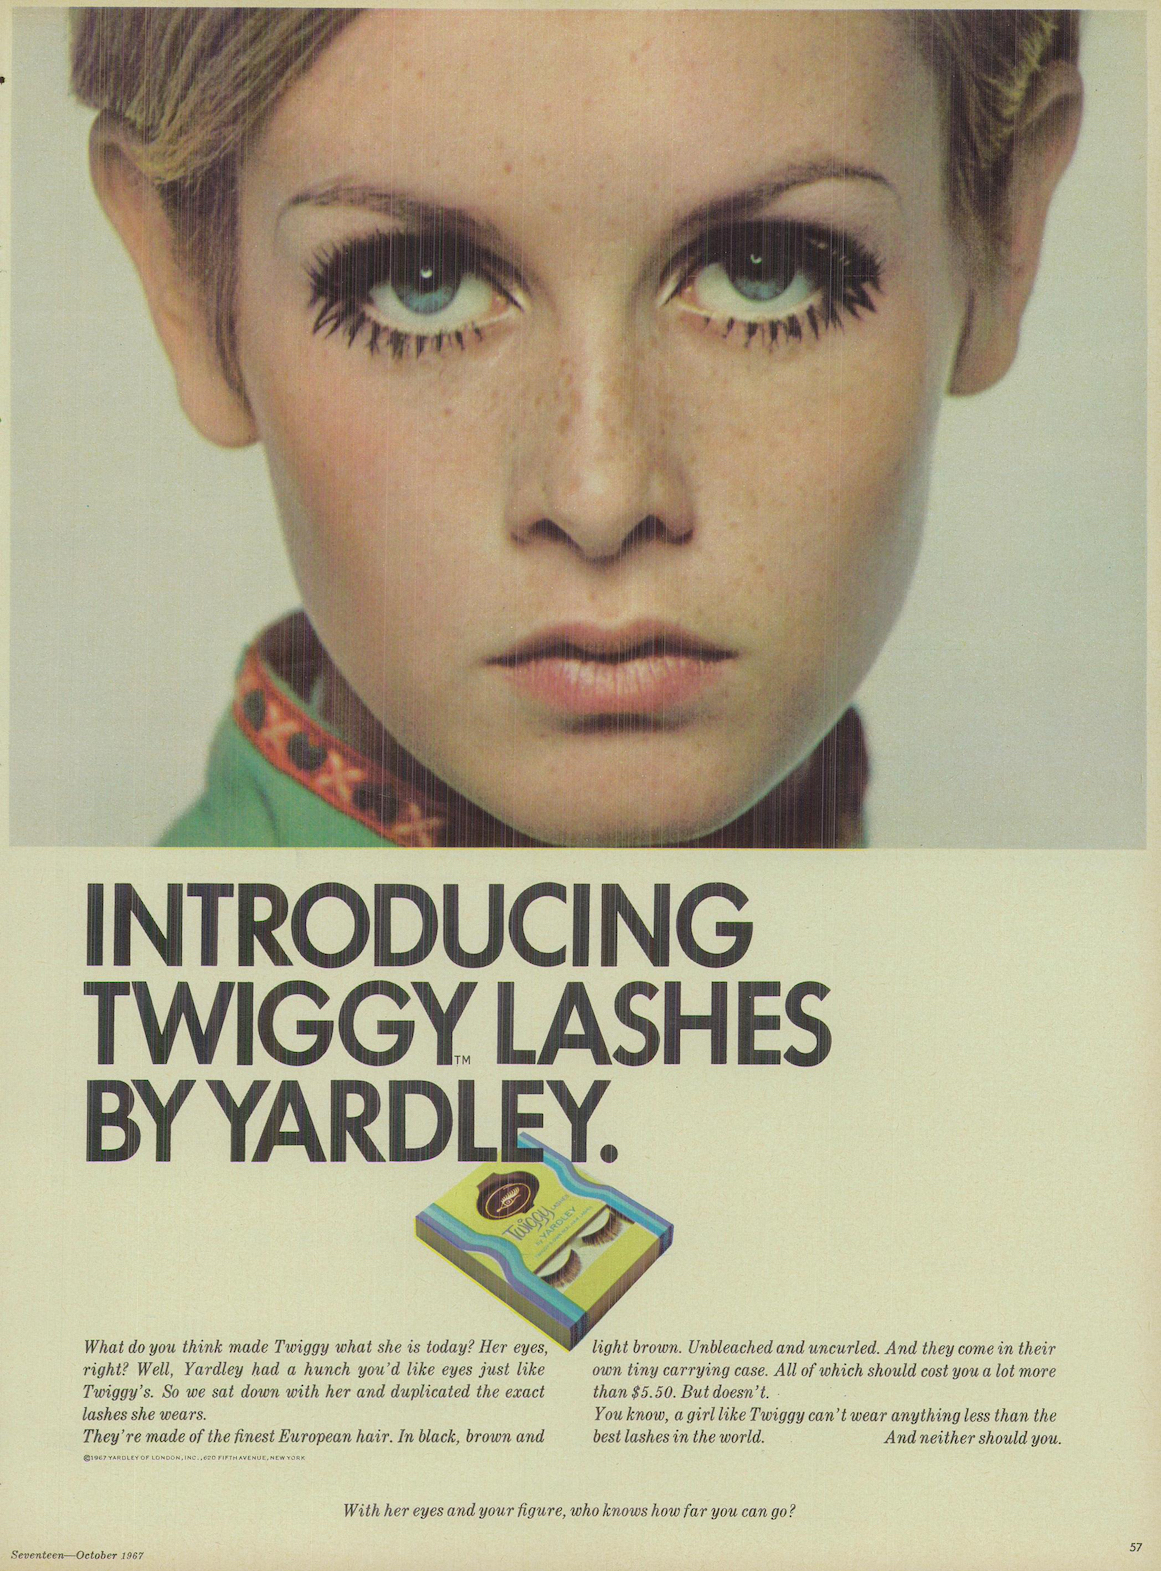 A 1967 advertisement for Yardley's Twiggy Lashes with the heading Introducing Twiggy Lashes By Yardley, which feature a photo of Twiggy's face, some text, and the product